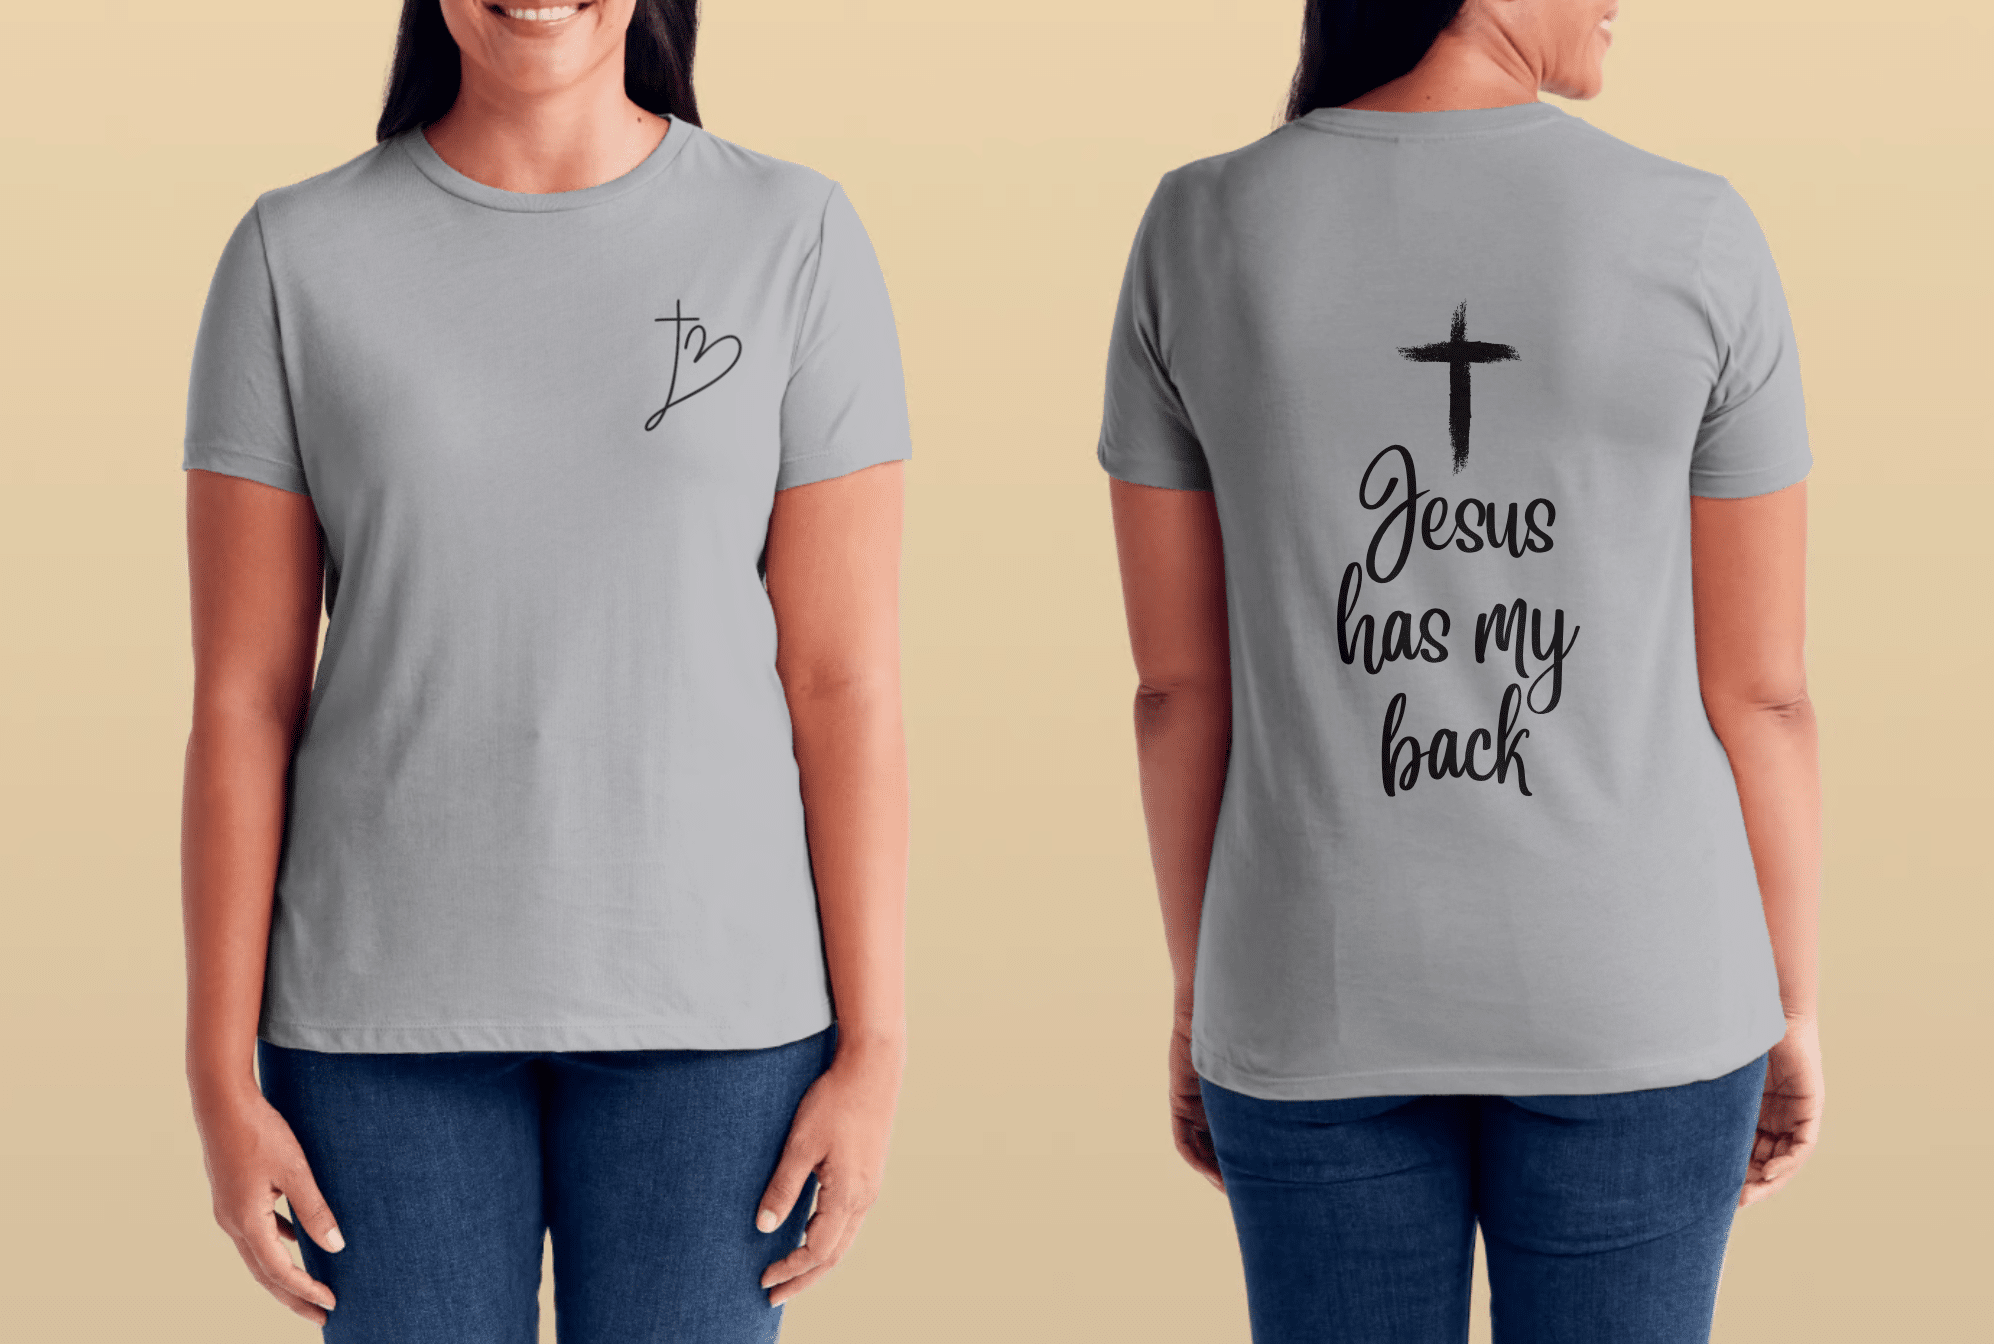 Jesus has my back shirt with message of worship at christian book store